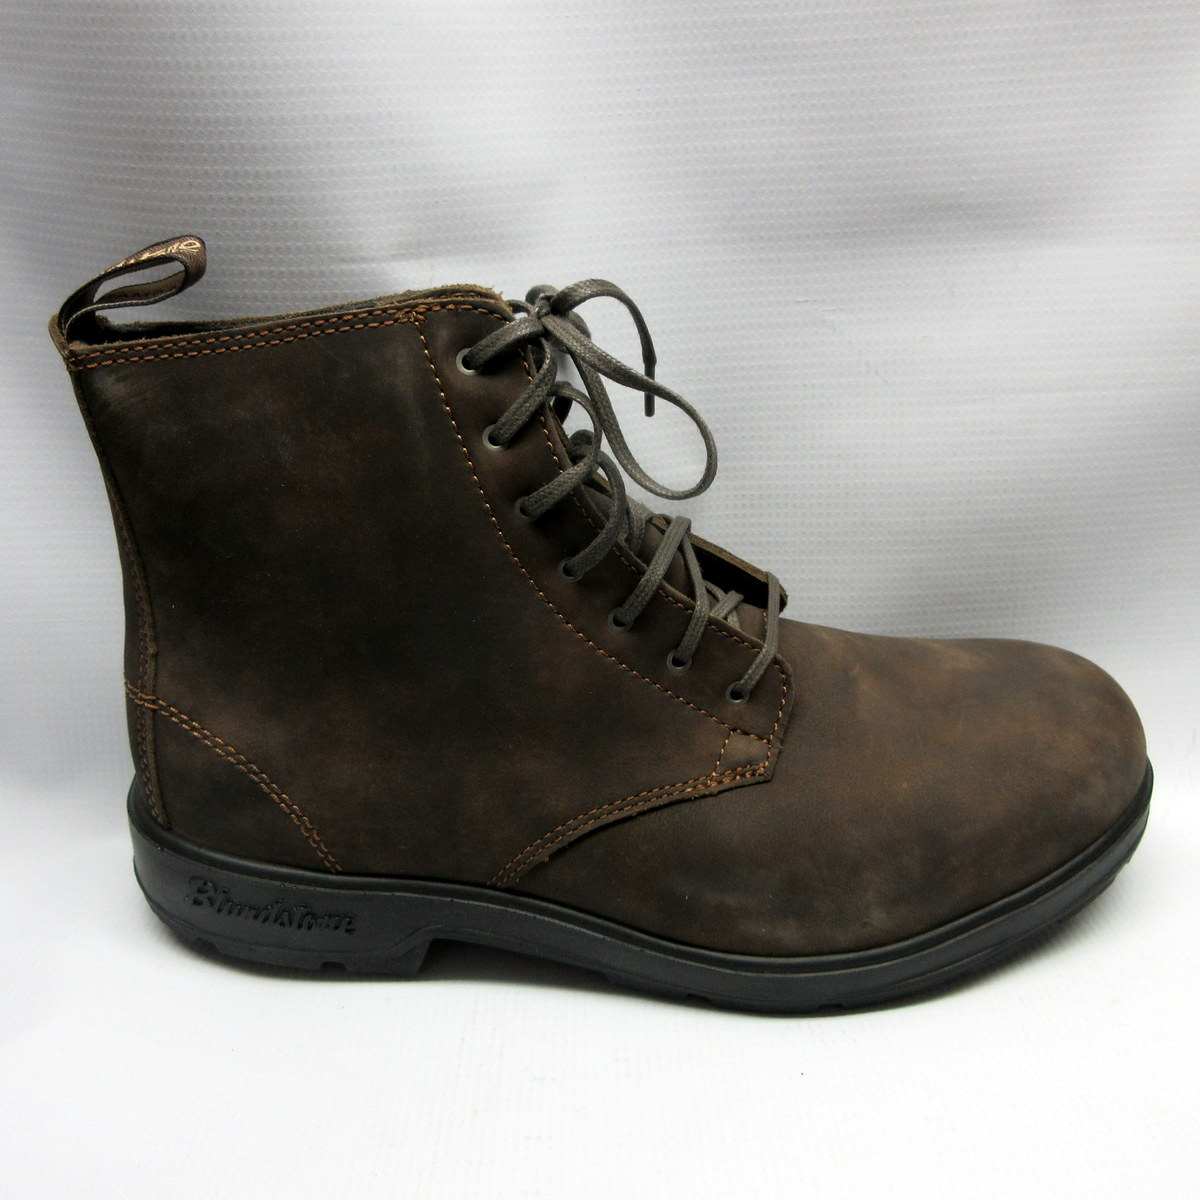 lace up blundstone boots